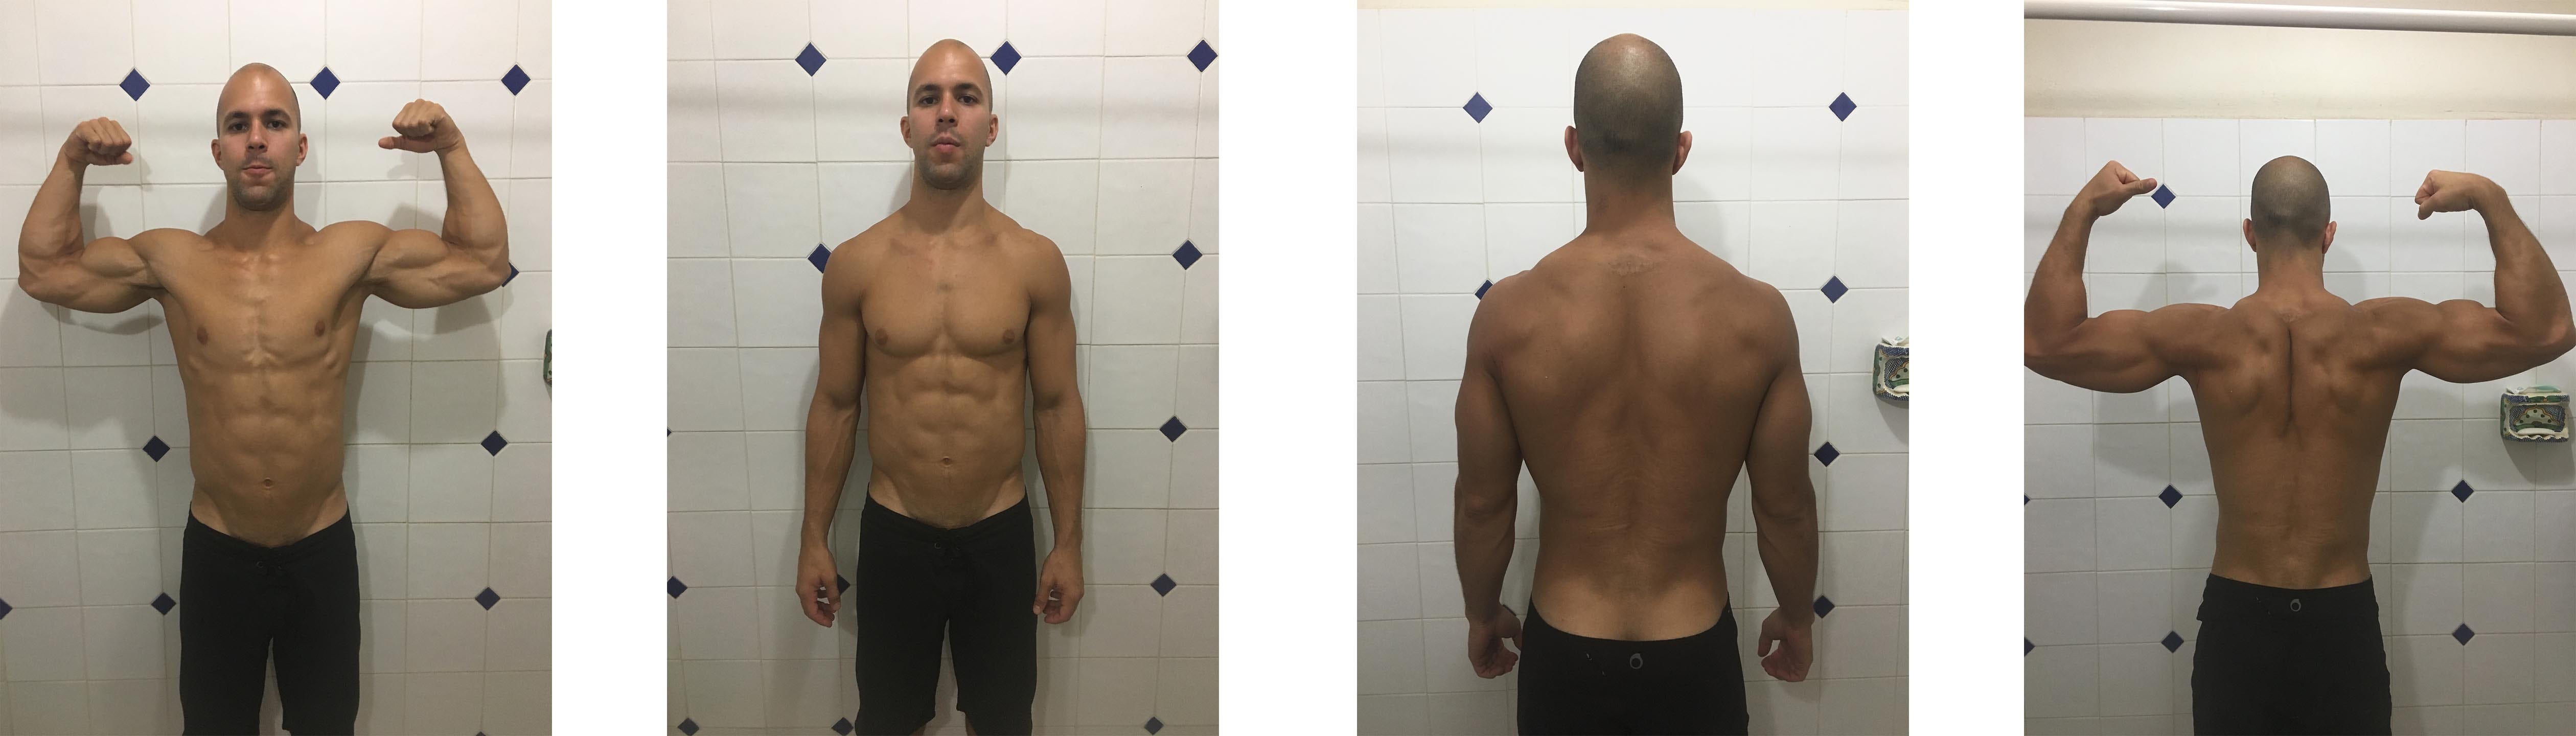 How I Gained 13 lbs Of Muscle in 7 Months, And How You Can Do It